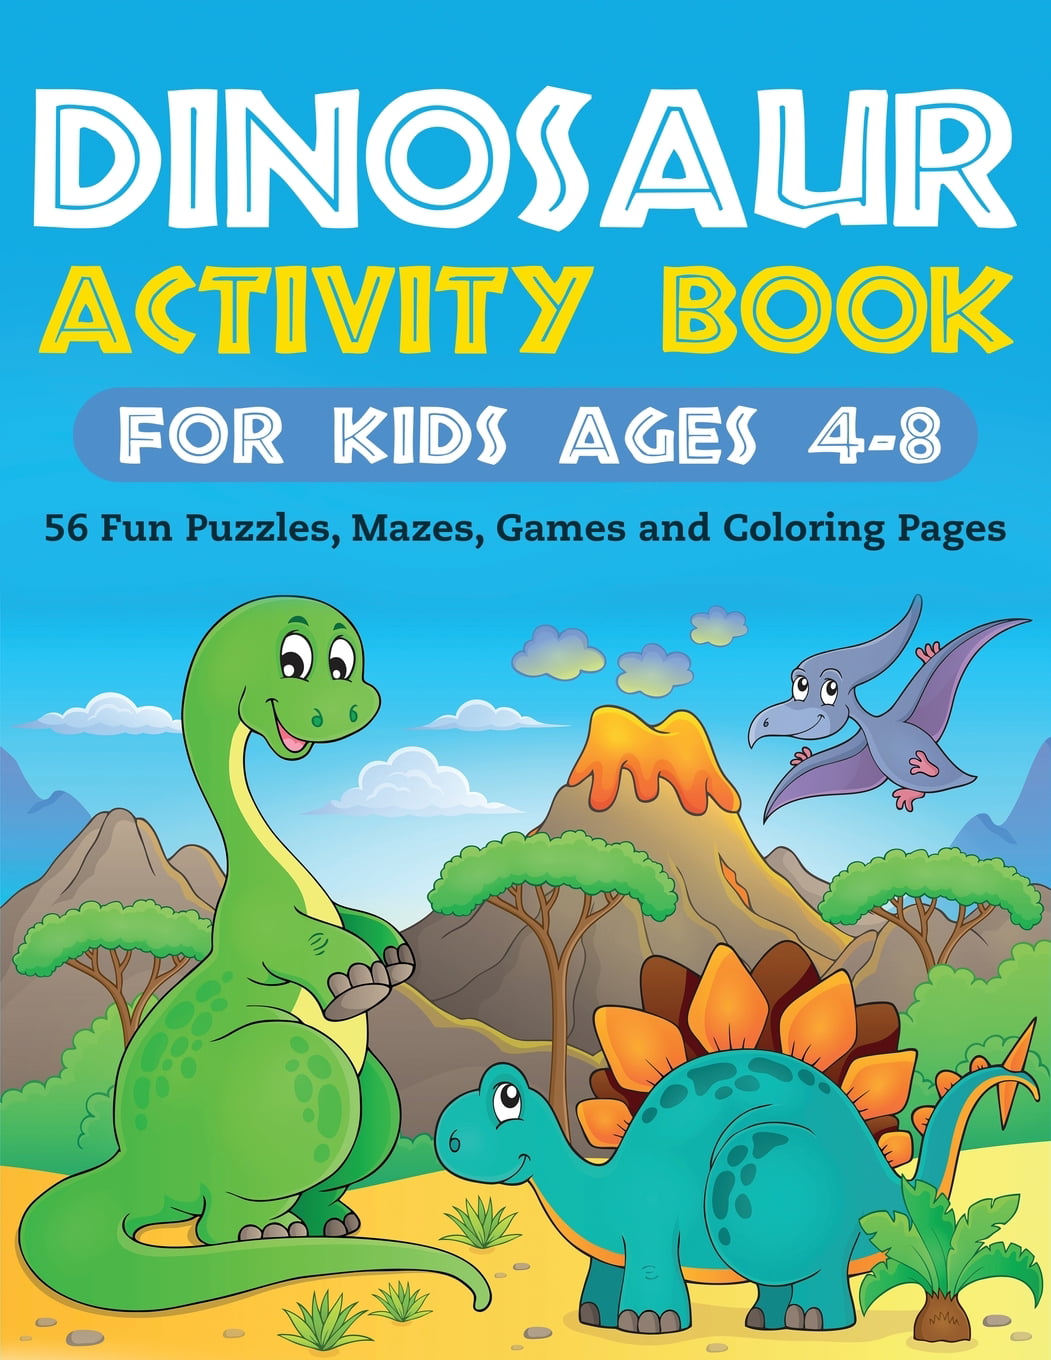 dinosaur-activity-book-for-kids-ages-4-8-56-fun-puzzles-mazes-games